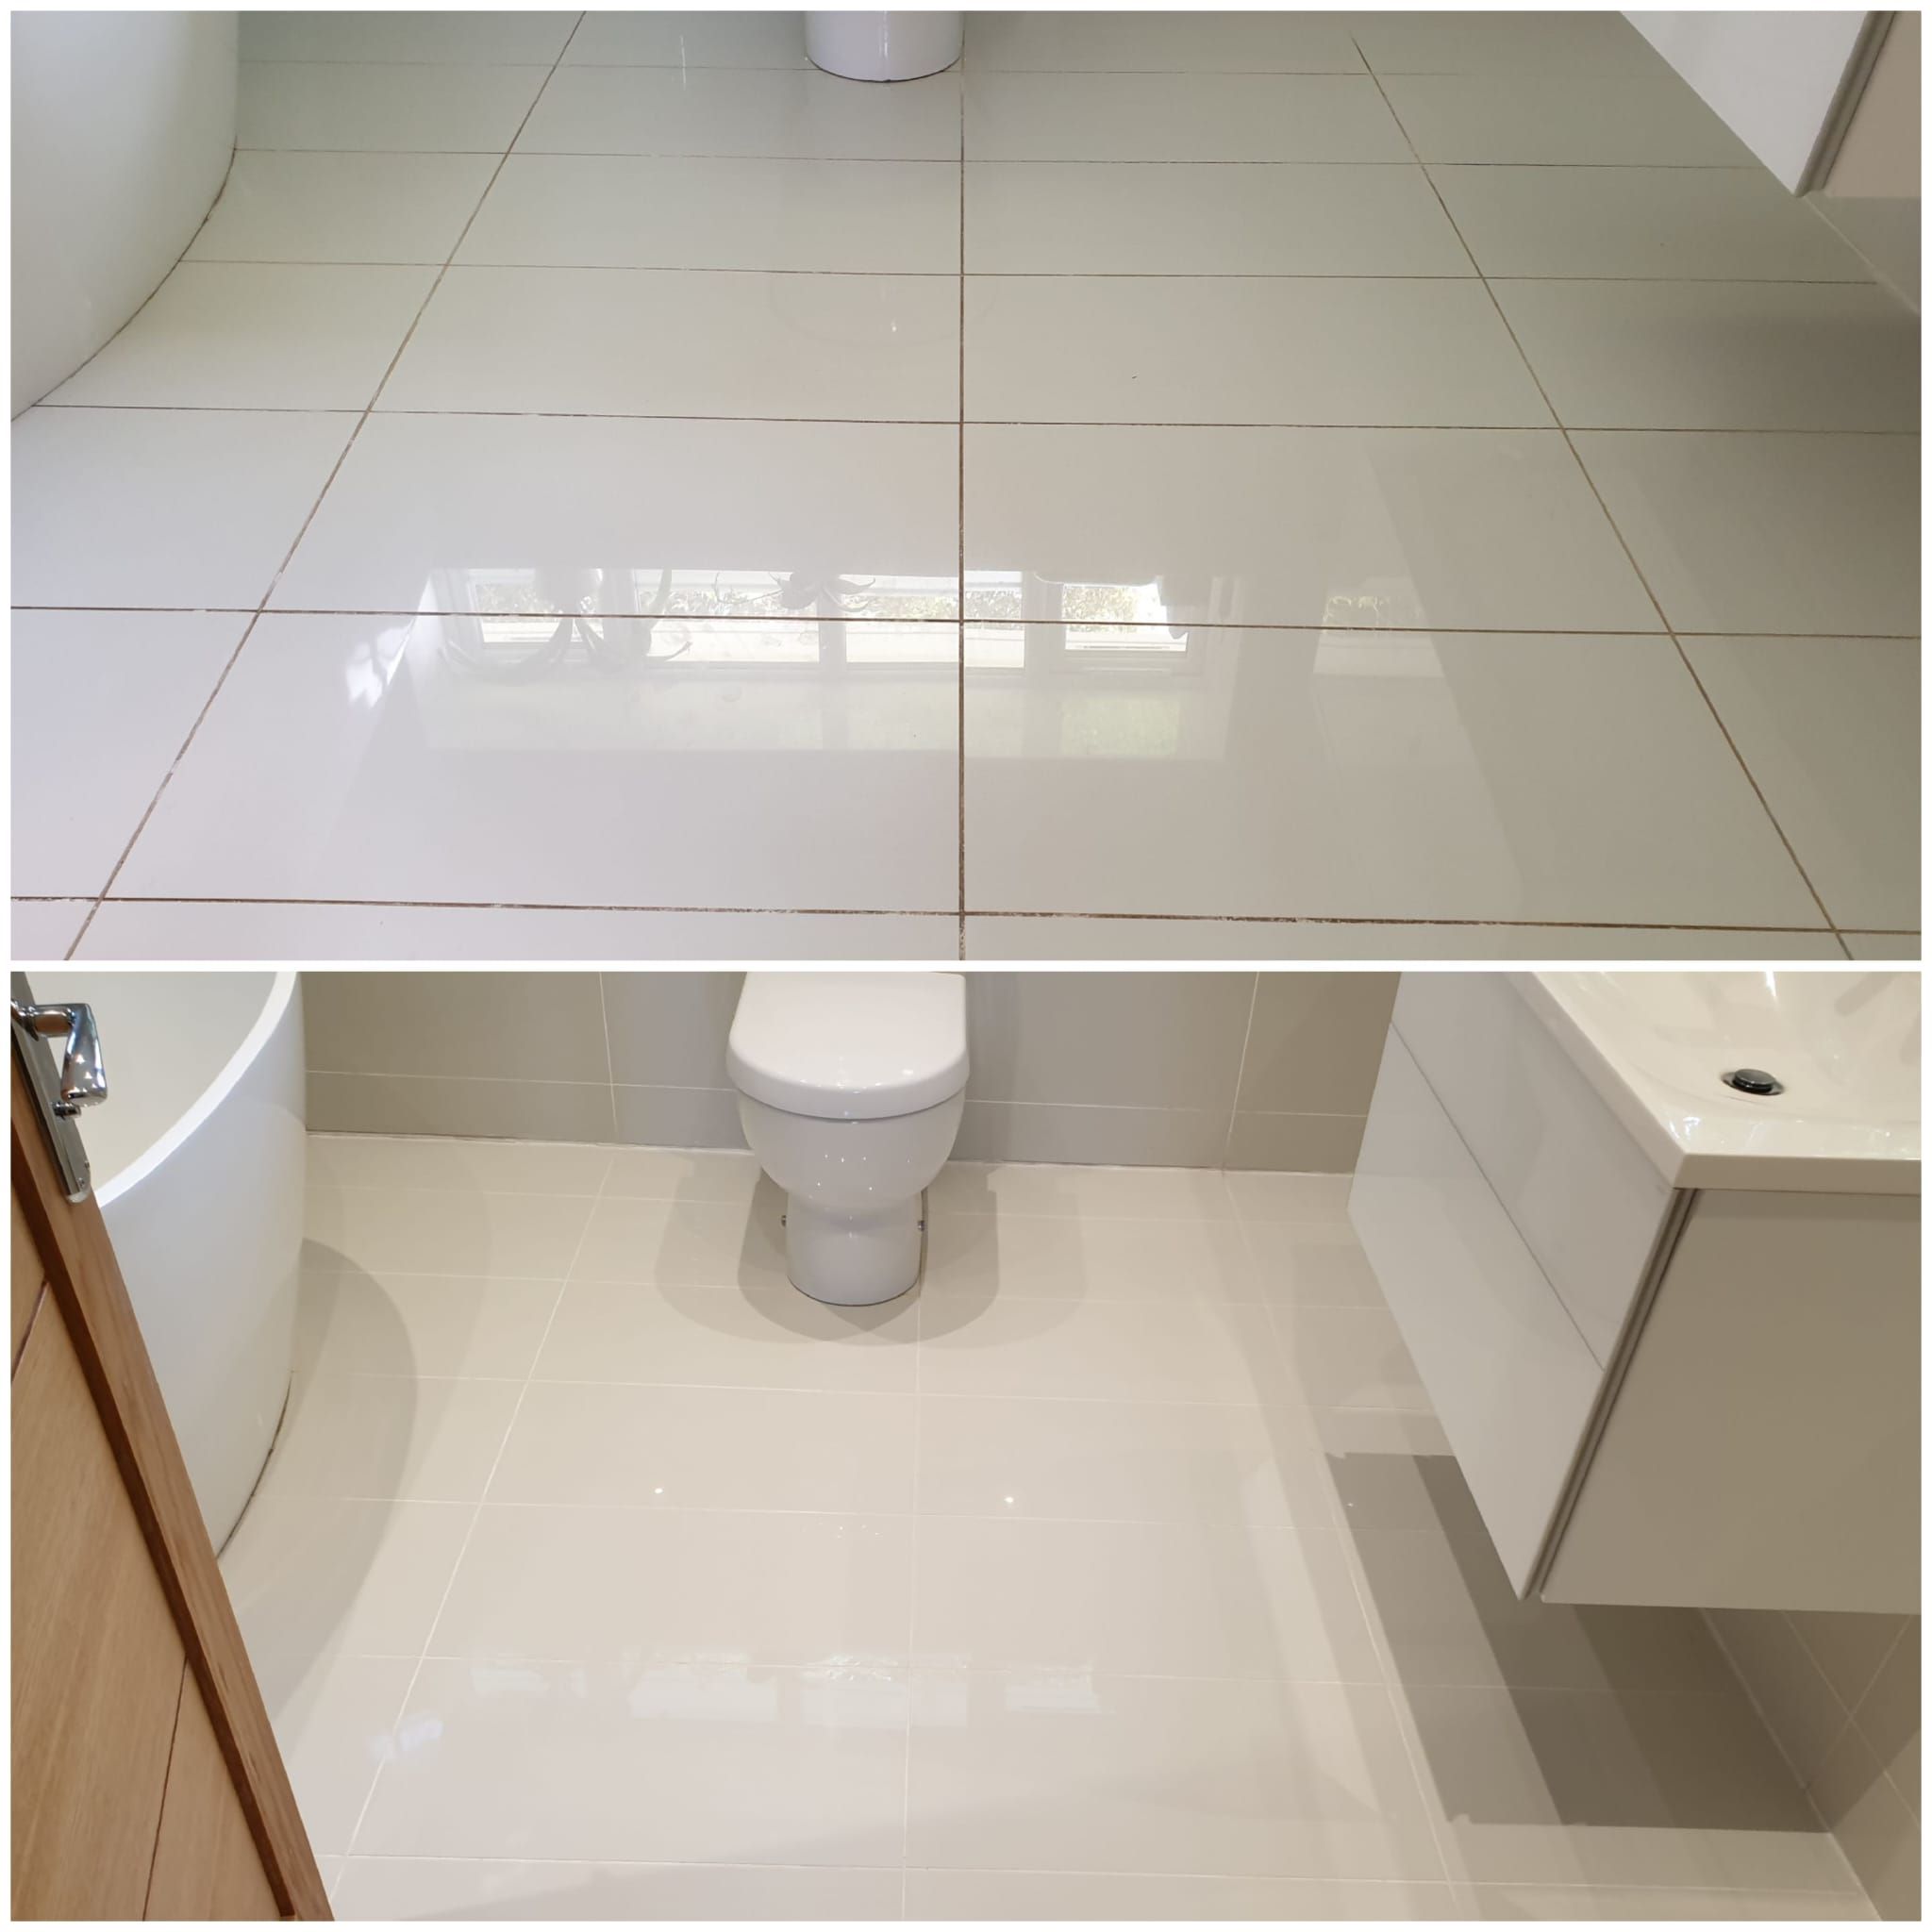 Bathroom floor before and after cleaning